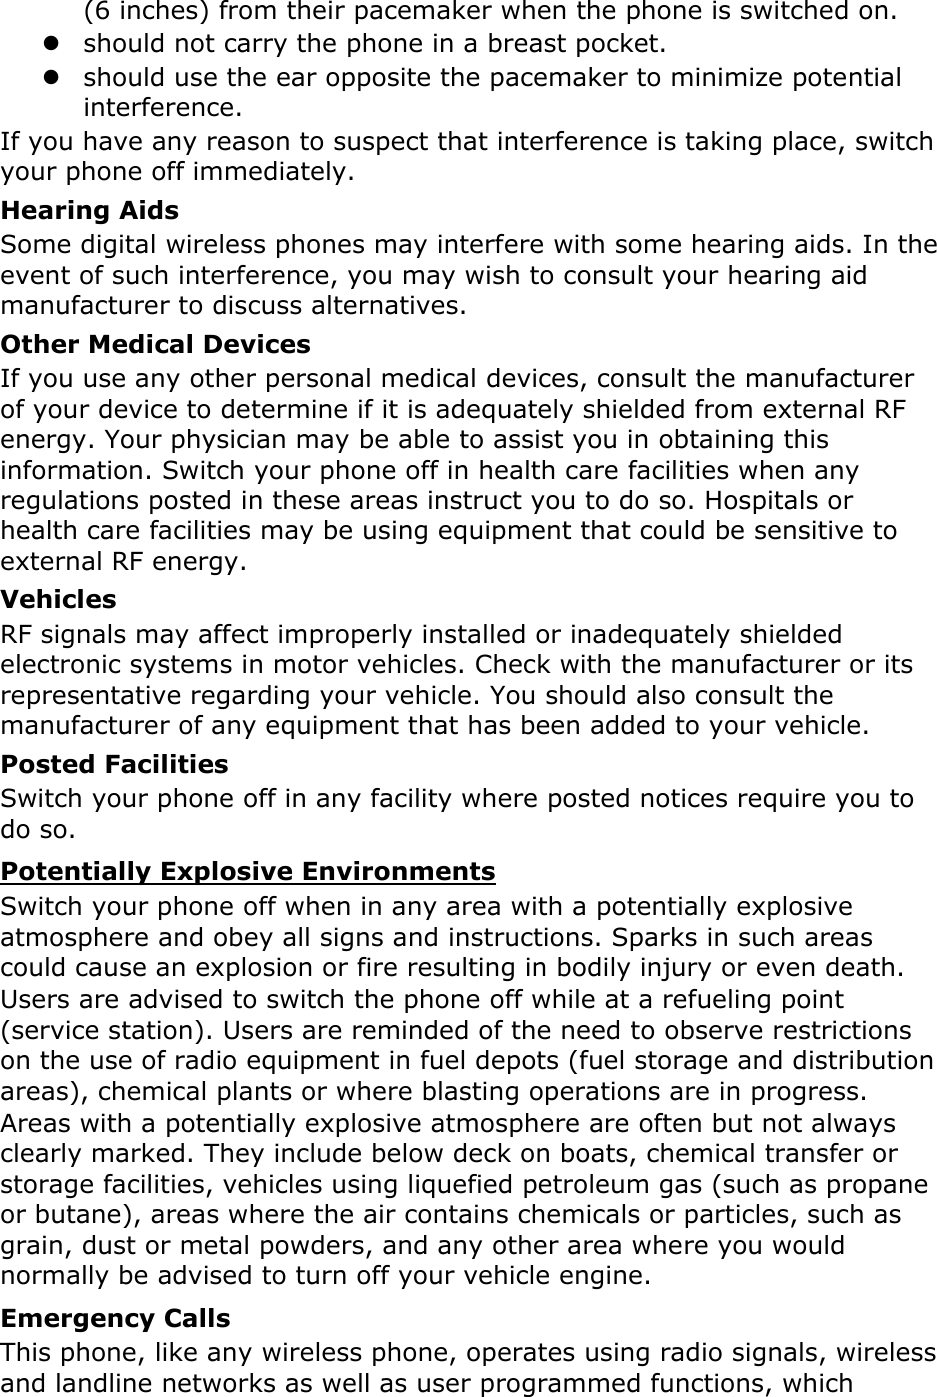 Page 15 of Samsung Electronics Co GTI9100P Cellular/PCS WCDMA/GSM/EDGE Phone with WLAN, RFID and Bluetooth User Manual